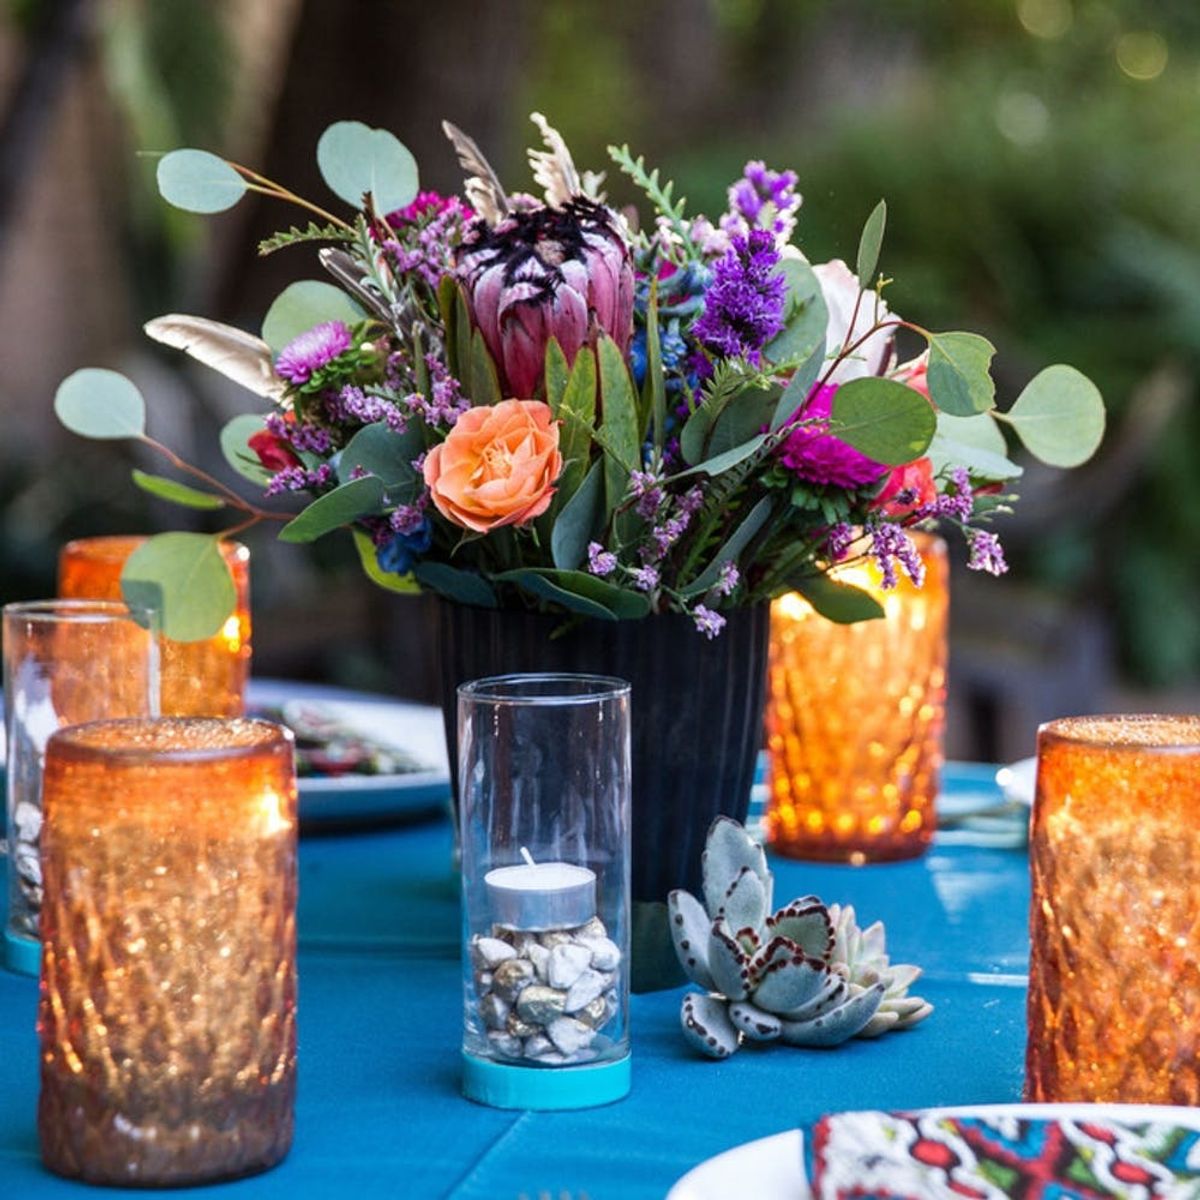 12 Need-to-Know Tips for DIYing Your Wedding Flowers